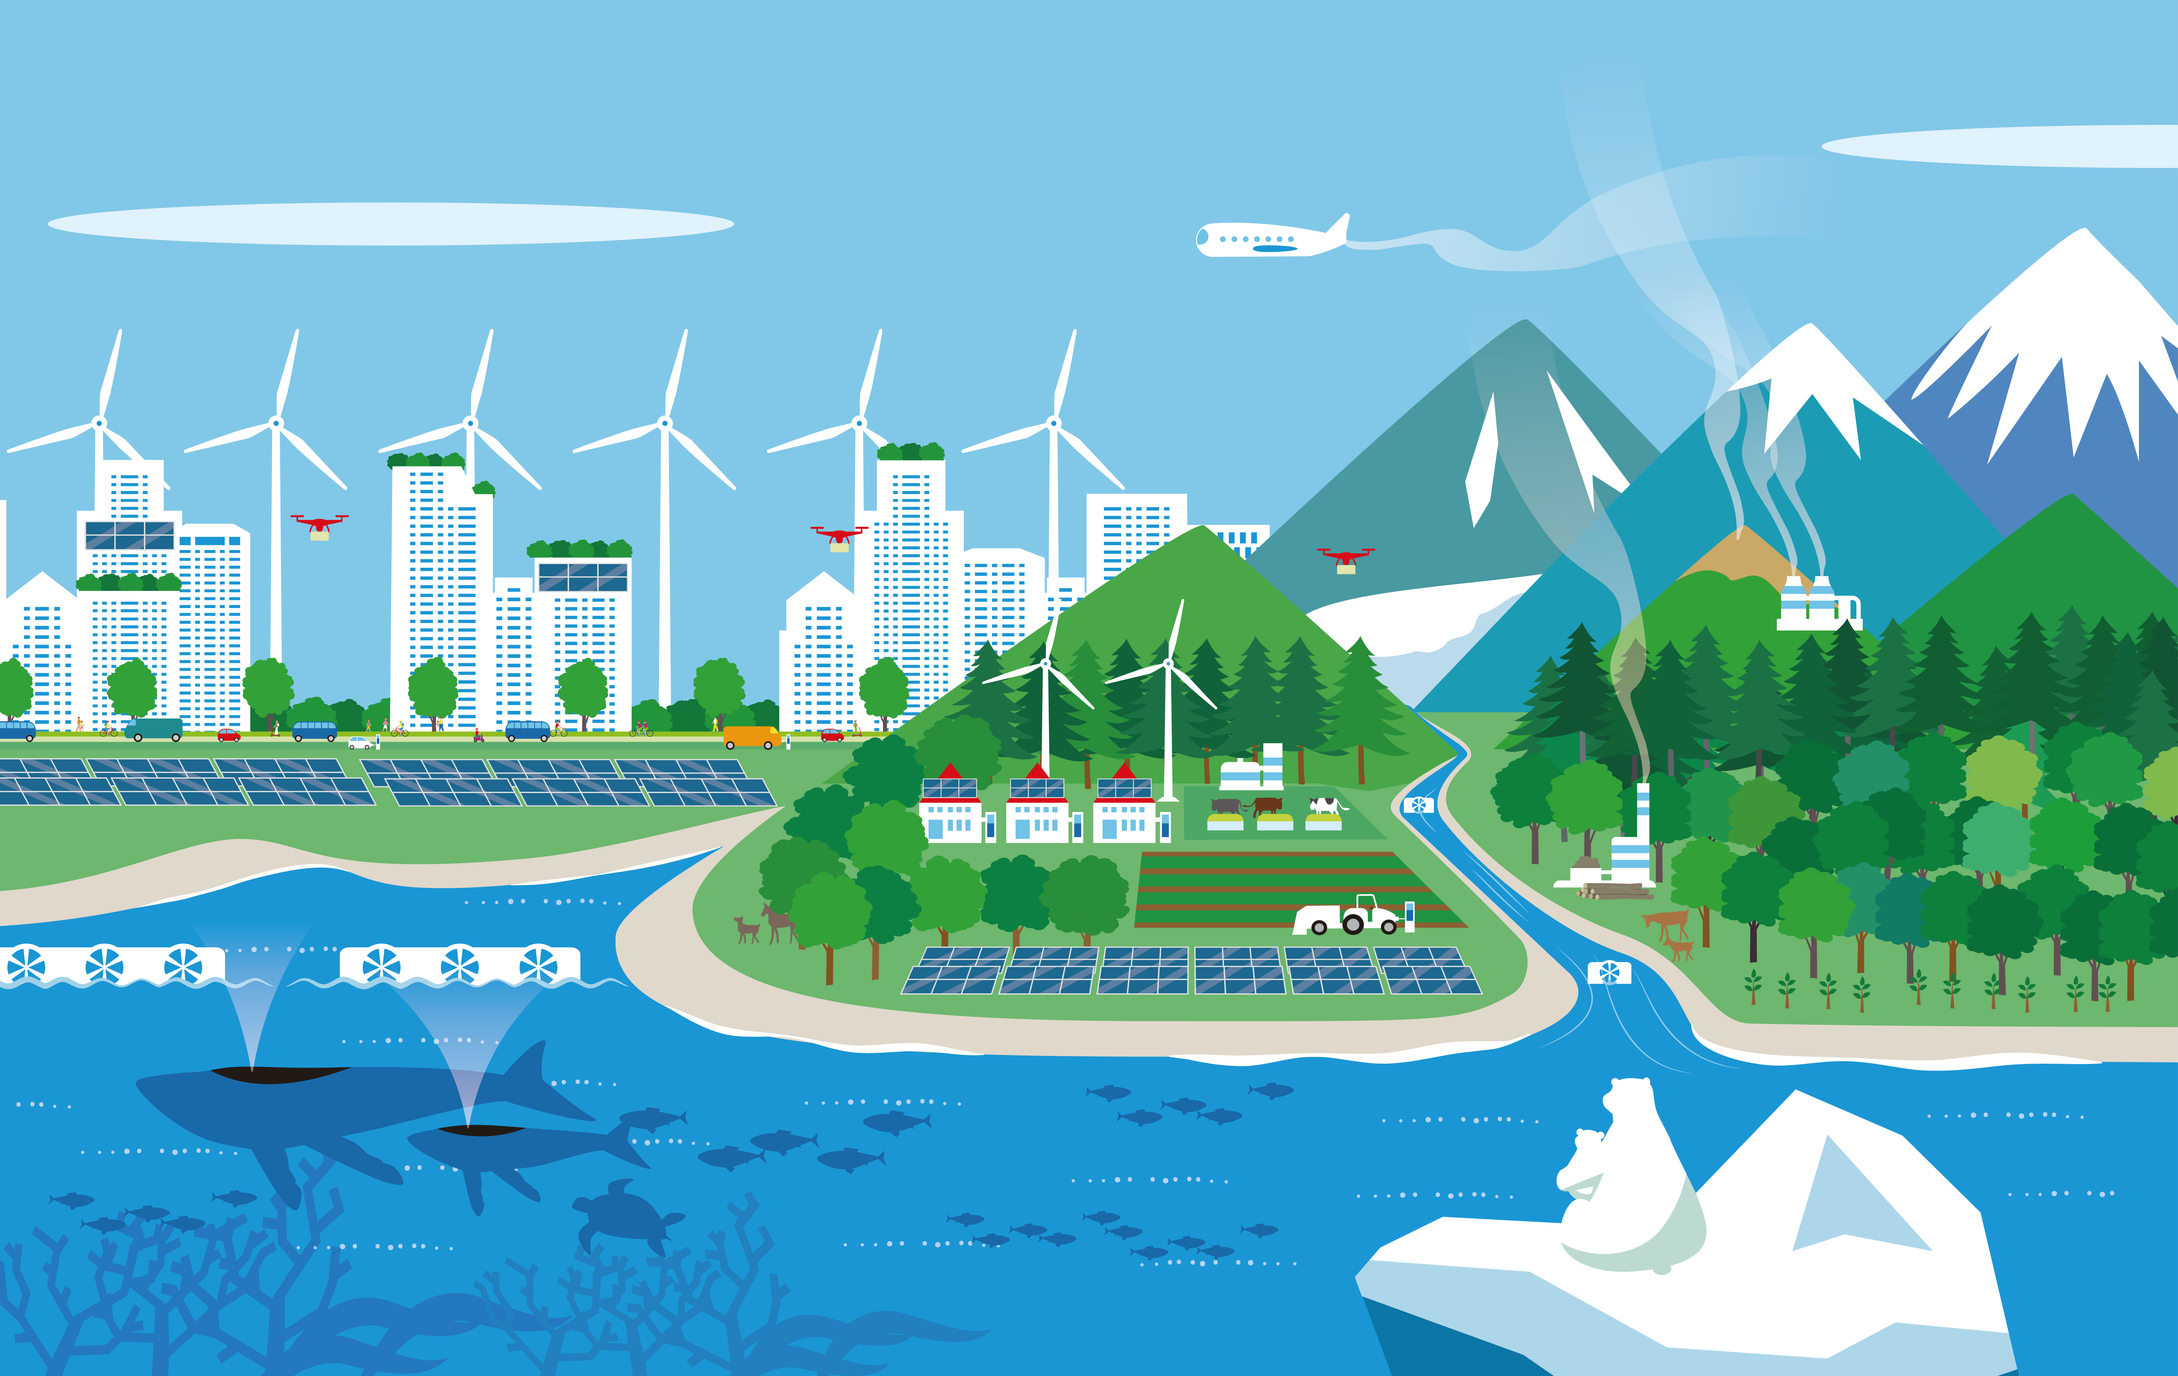 Illustration of a cleaner and healthier ecosystem with various renewable energy sources